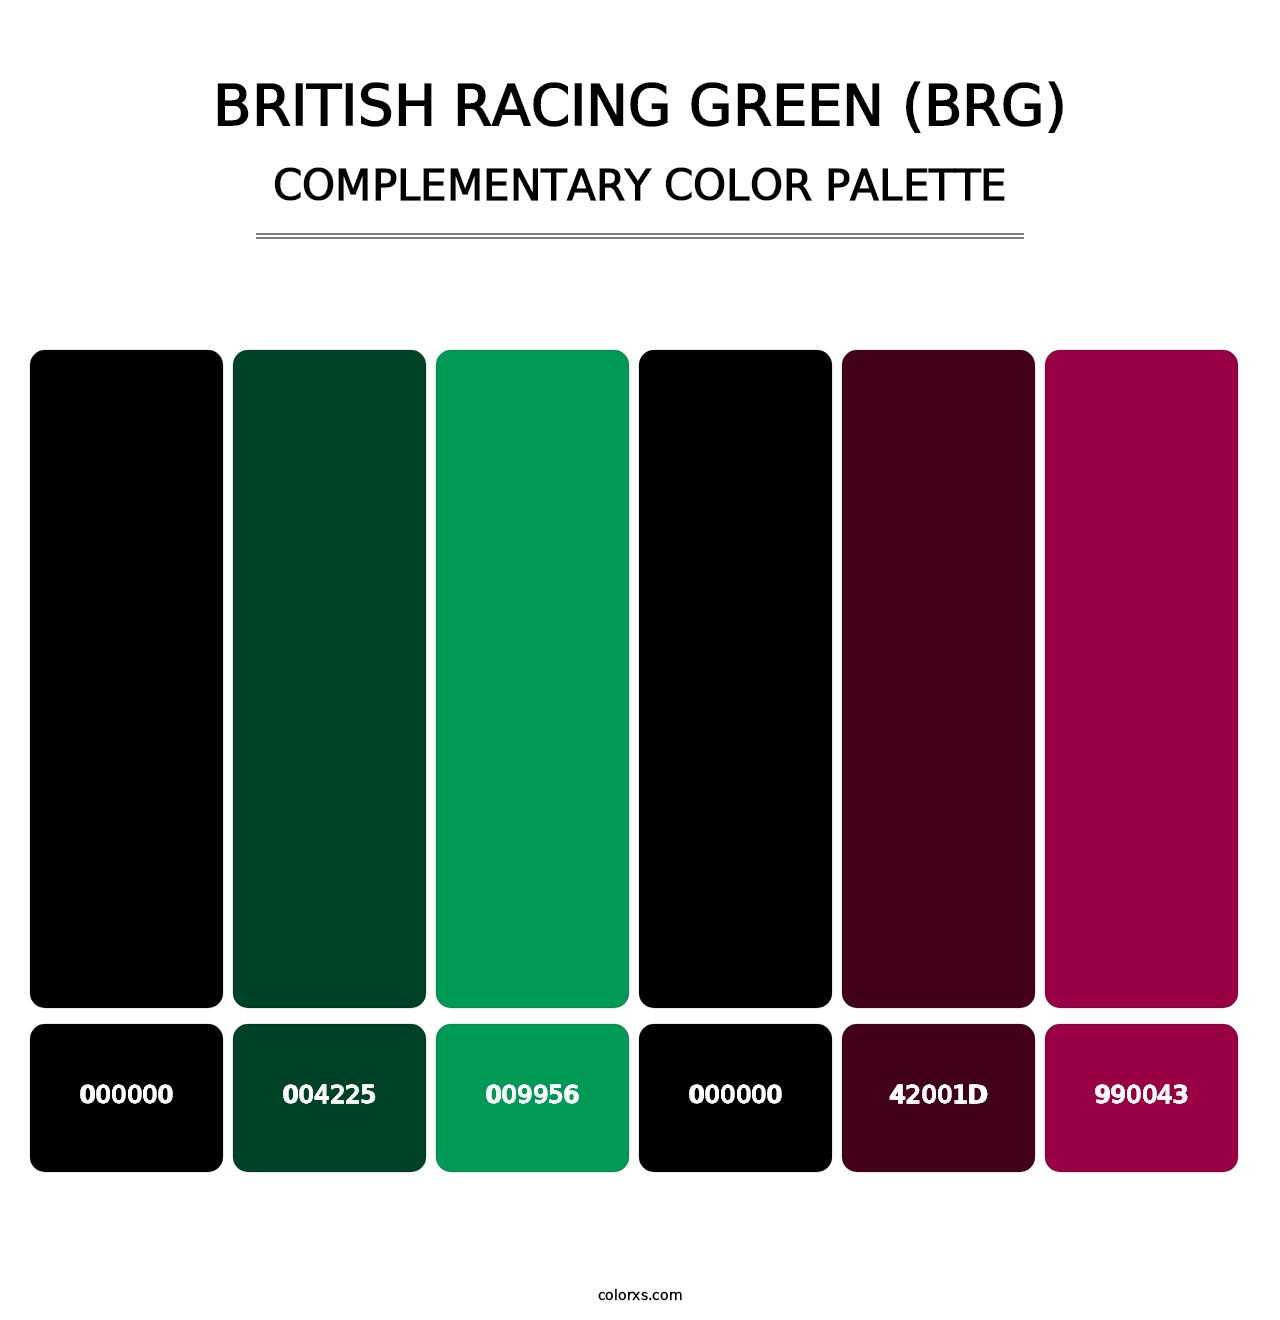 British Racing Green (BRG) - Complementary Color Palette